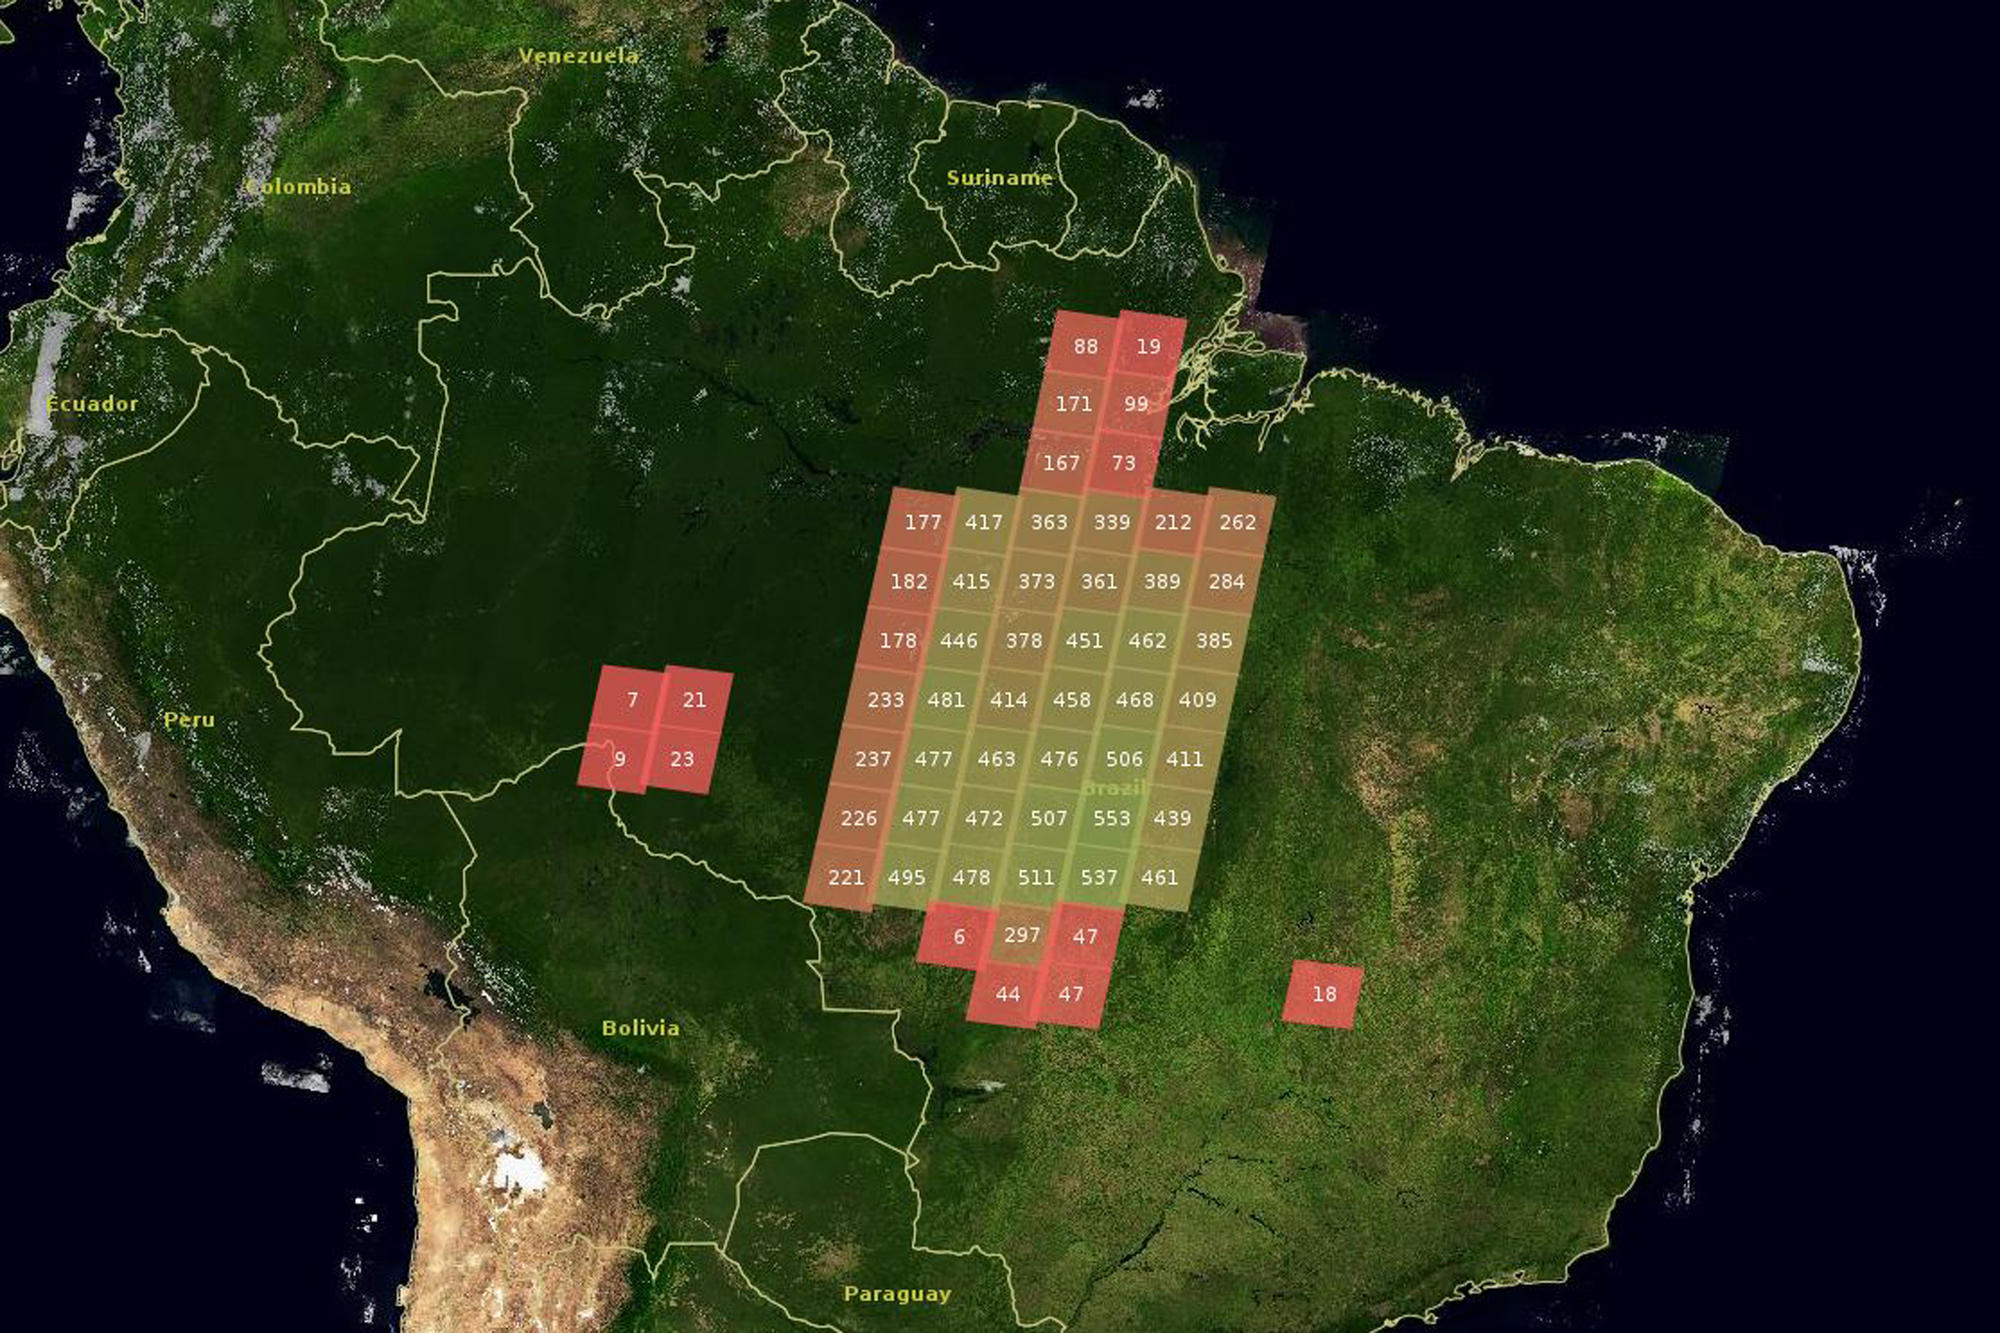 Fields of activity of the project in Brazil. Each box corresponds to an area of 200 x 200 km – the recording’s so-called “footprint.” The figures provide information about Landsat satellite data per footprint (green=a lot of data; red=little data)